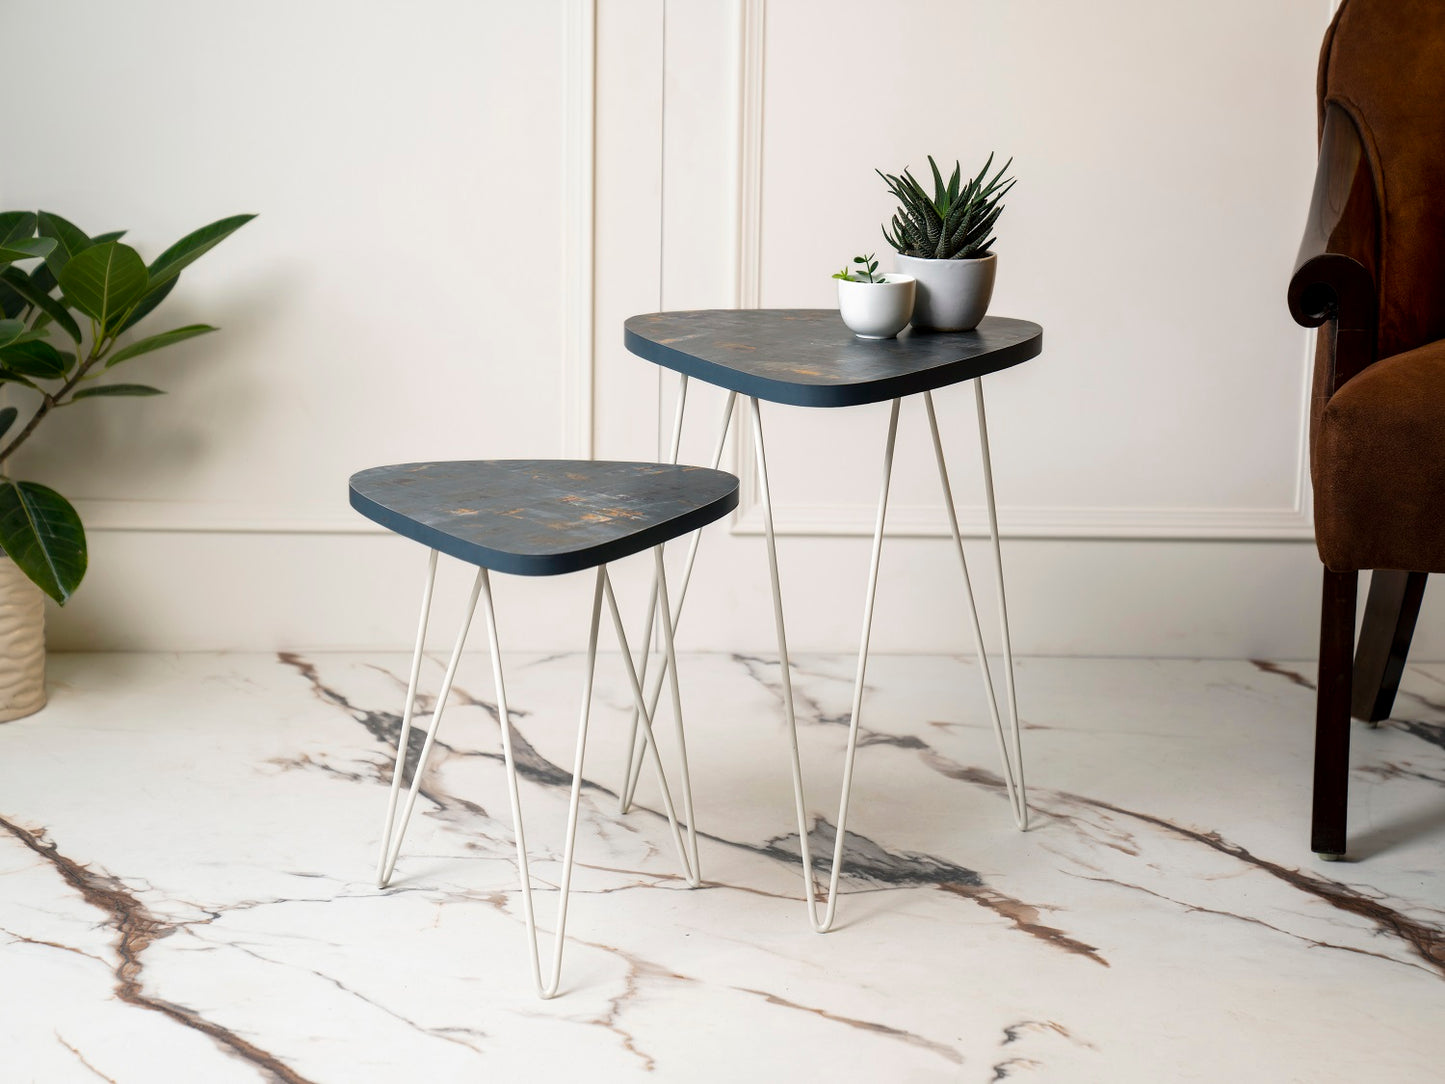 Bohemian Tint Trinity Nesting Tables with Hairpin Legs, Side Tables, Wooden Tables, Living Room Decor by A Tiny Mistake